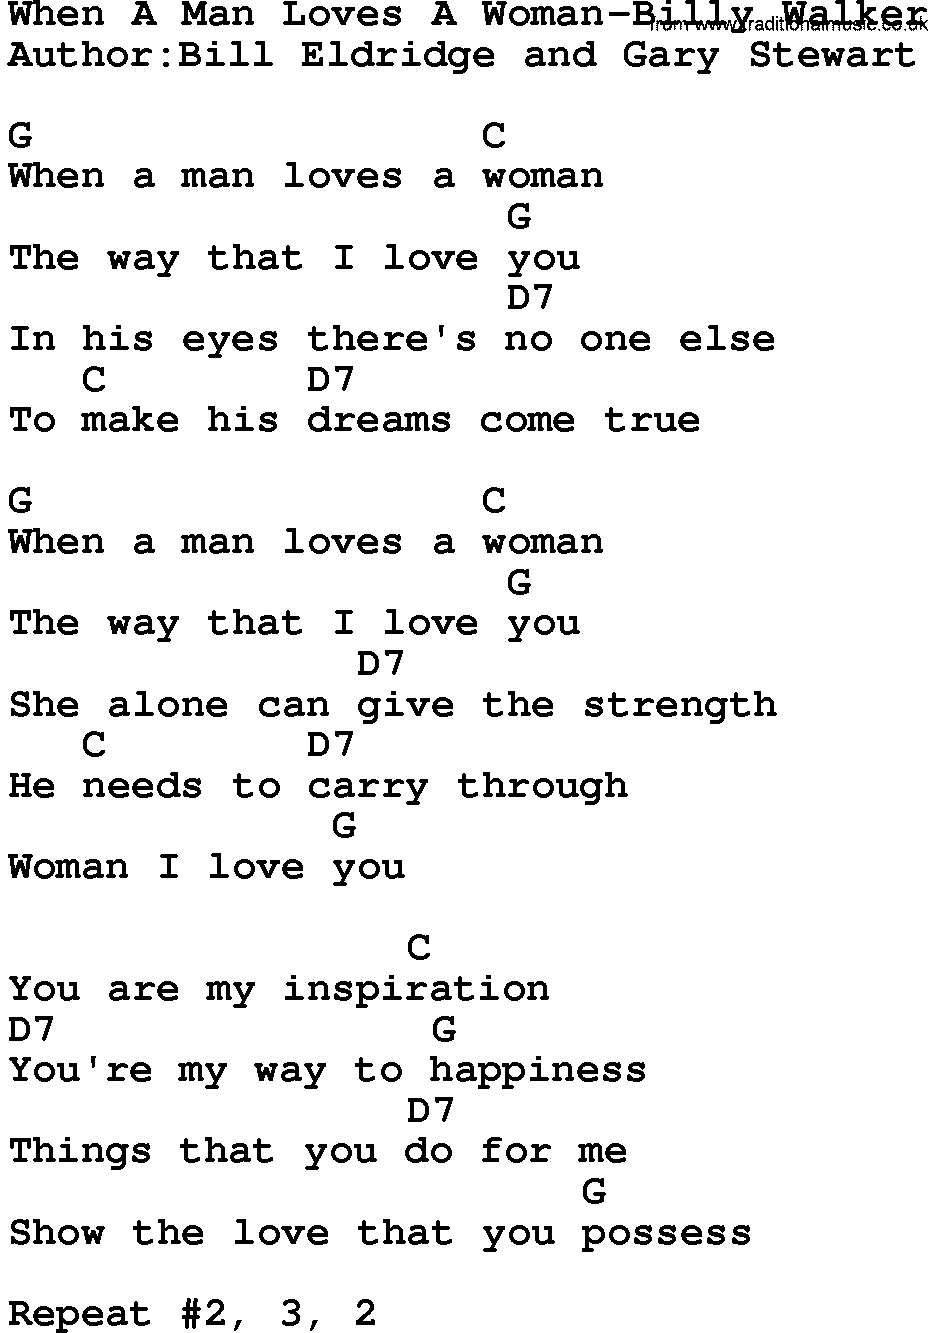 Country music song: When A Man Loves A Woman-Billy Walker lyrics and chords